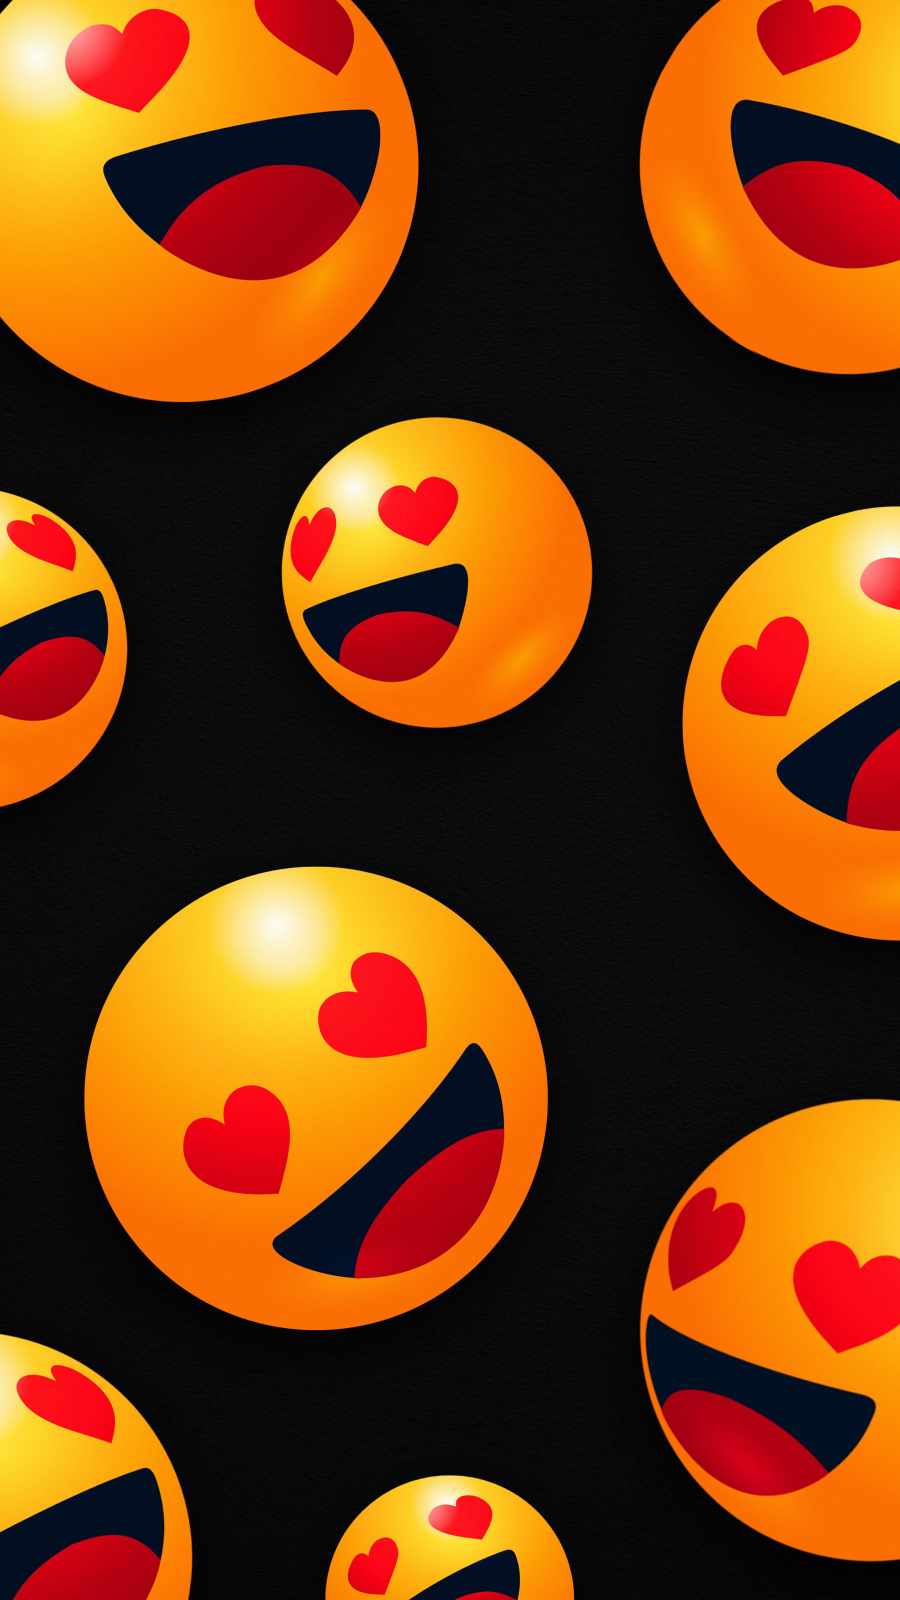 Love Faces iPhone Wallpaper